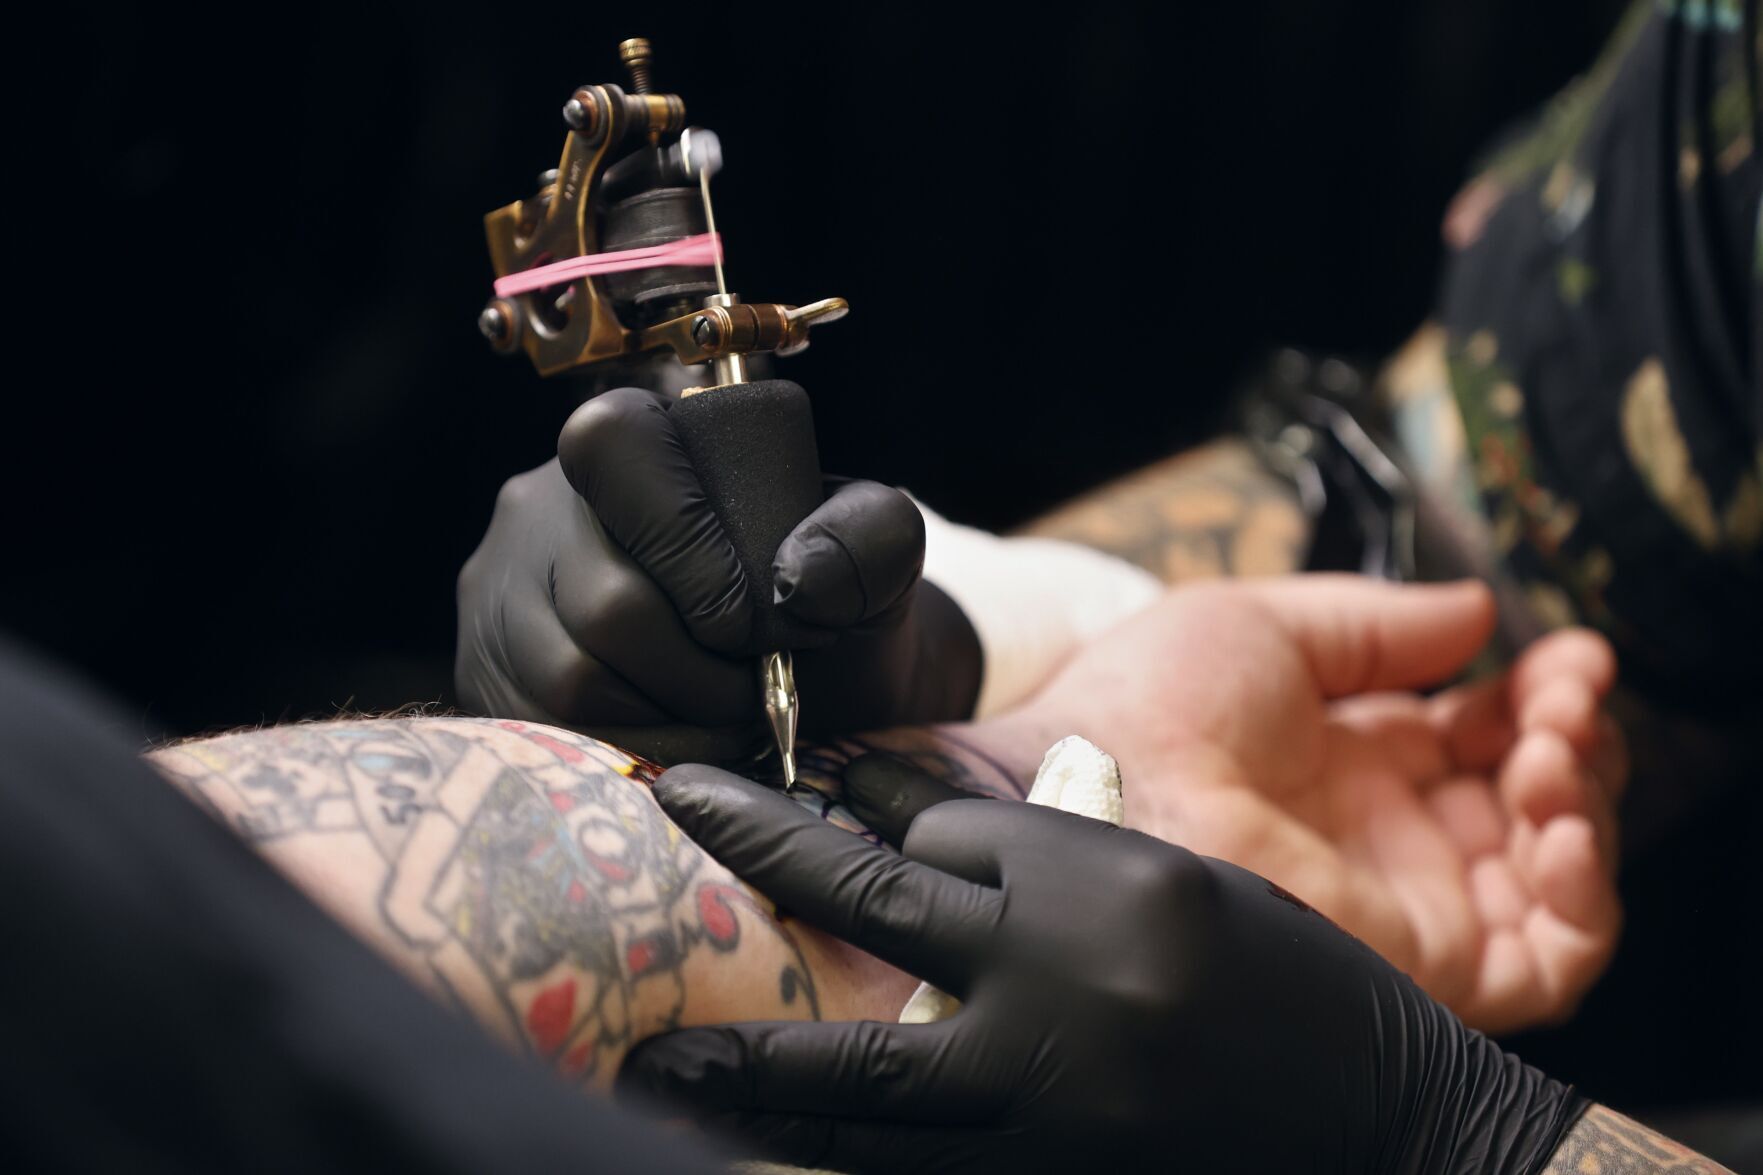 Denvers Tattoo Industry Had a Colorful History Before the Dark Events of  December 27  Westword